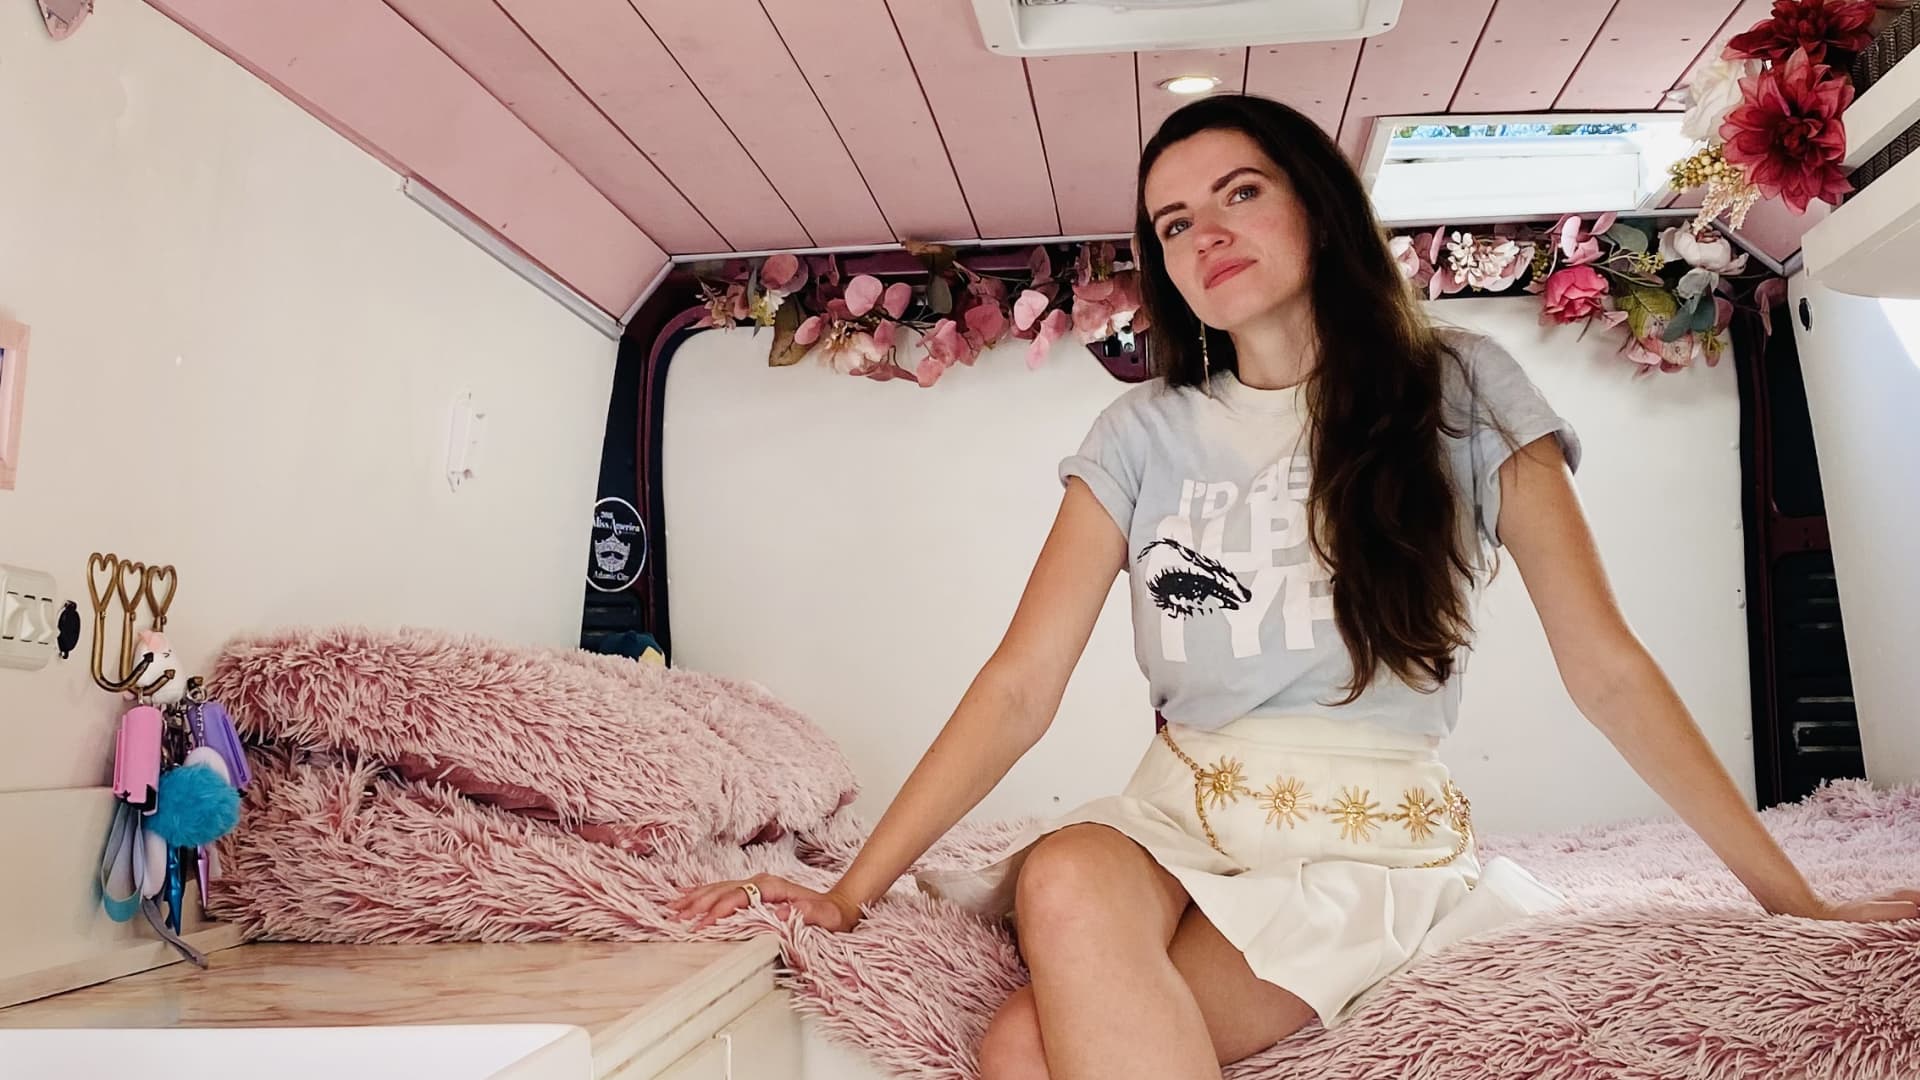 This 25-year-old renovates a $31,000 van inspired by Taylor Swift